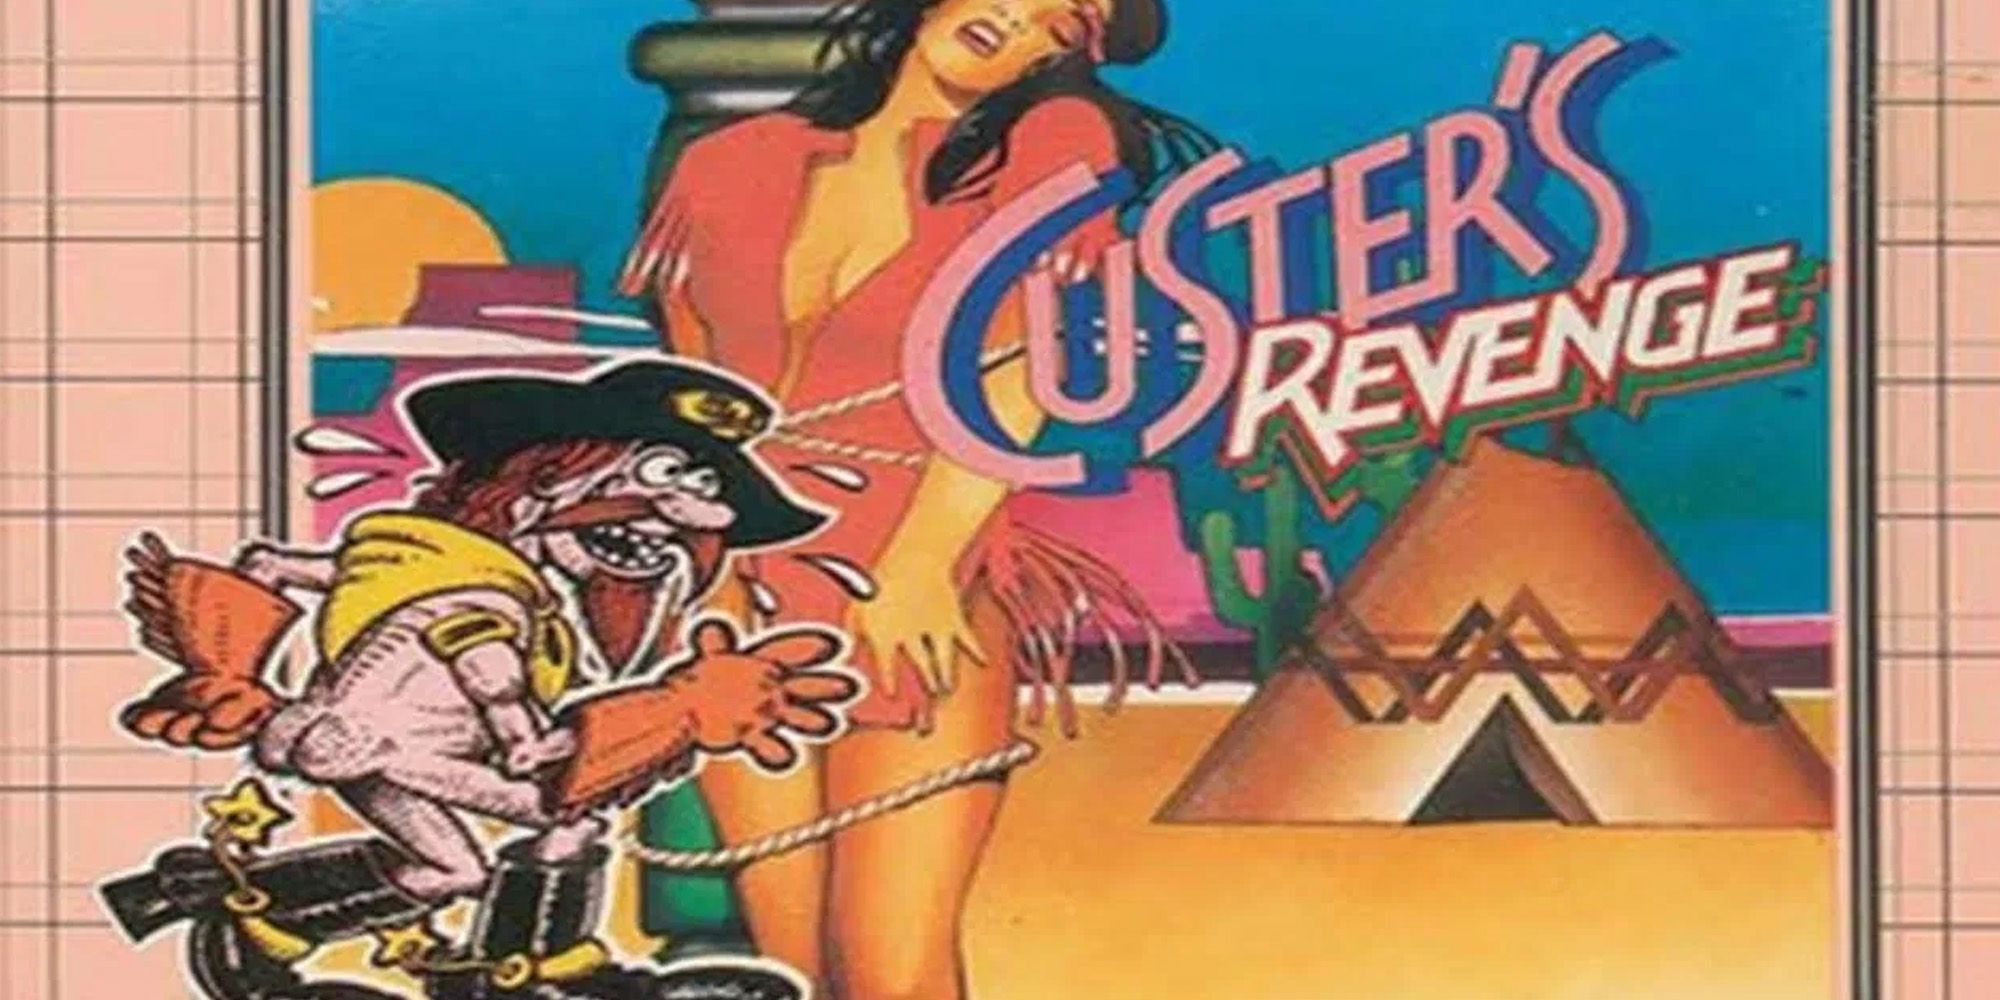 erotic games that are turn offs - Custer's Revenge